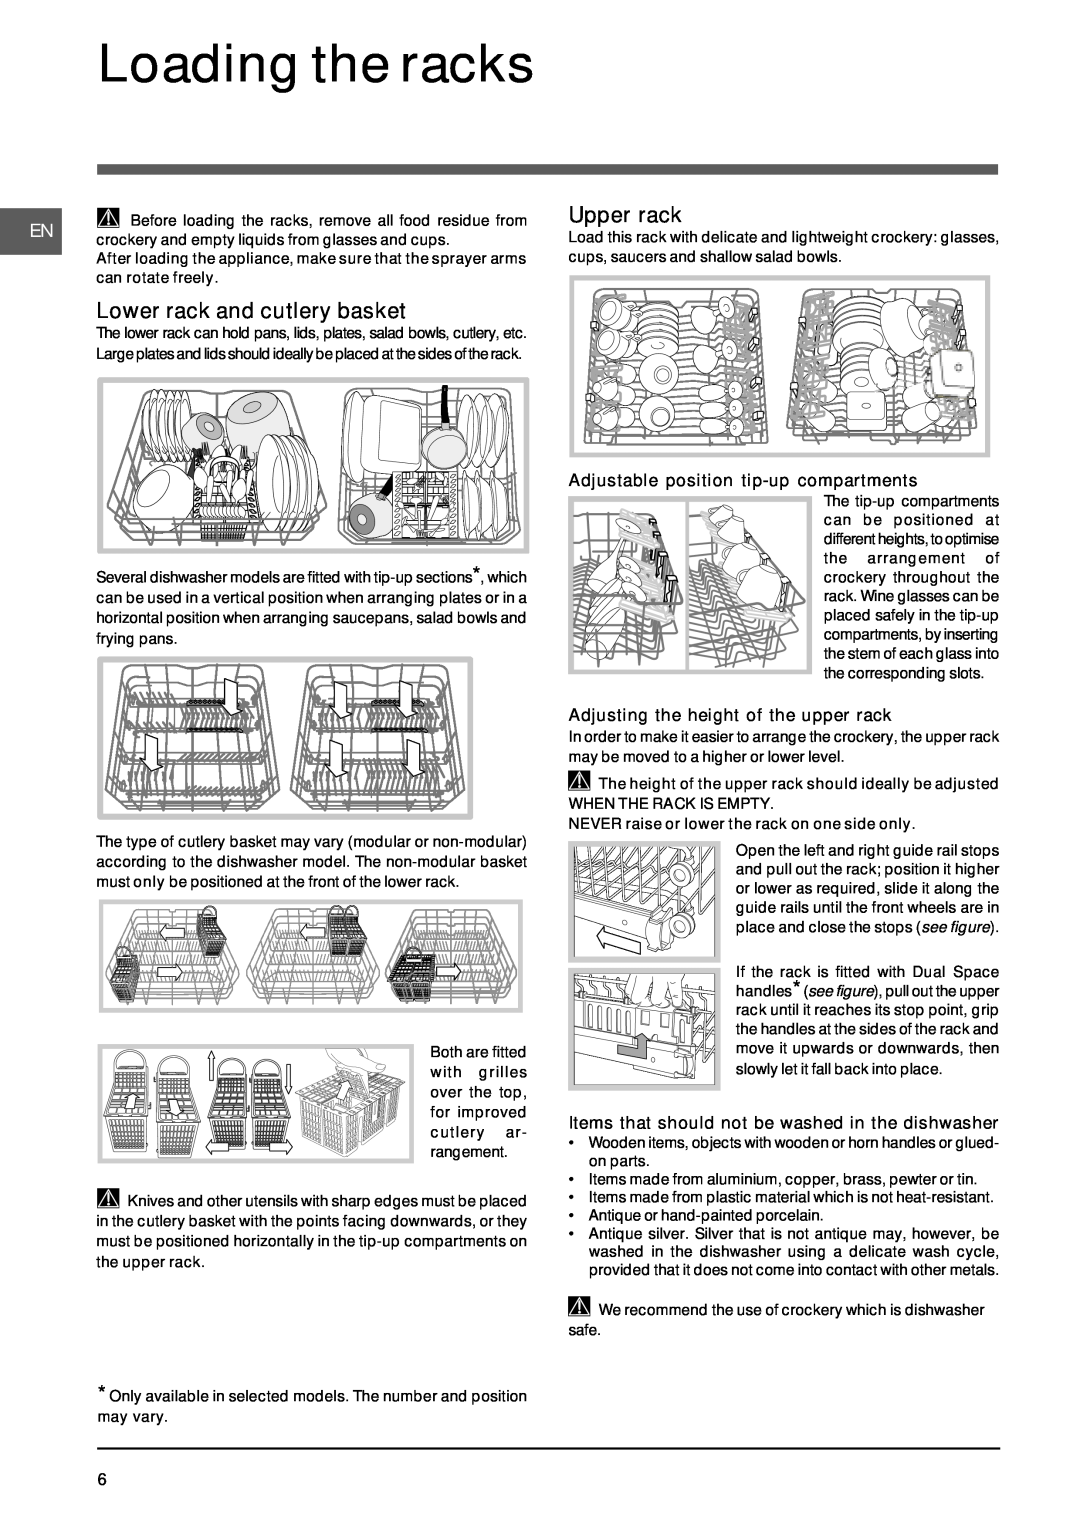 Indesit DIF 1614 operating instructions Loading the racks, Lower rack and cutlery basket, Upper rack 